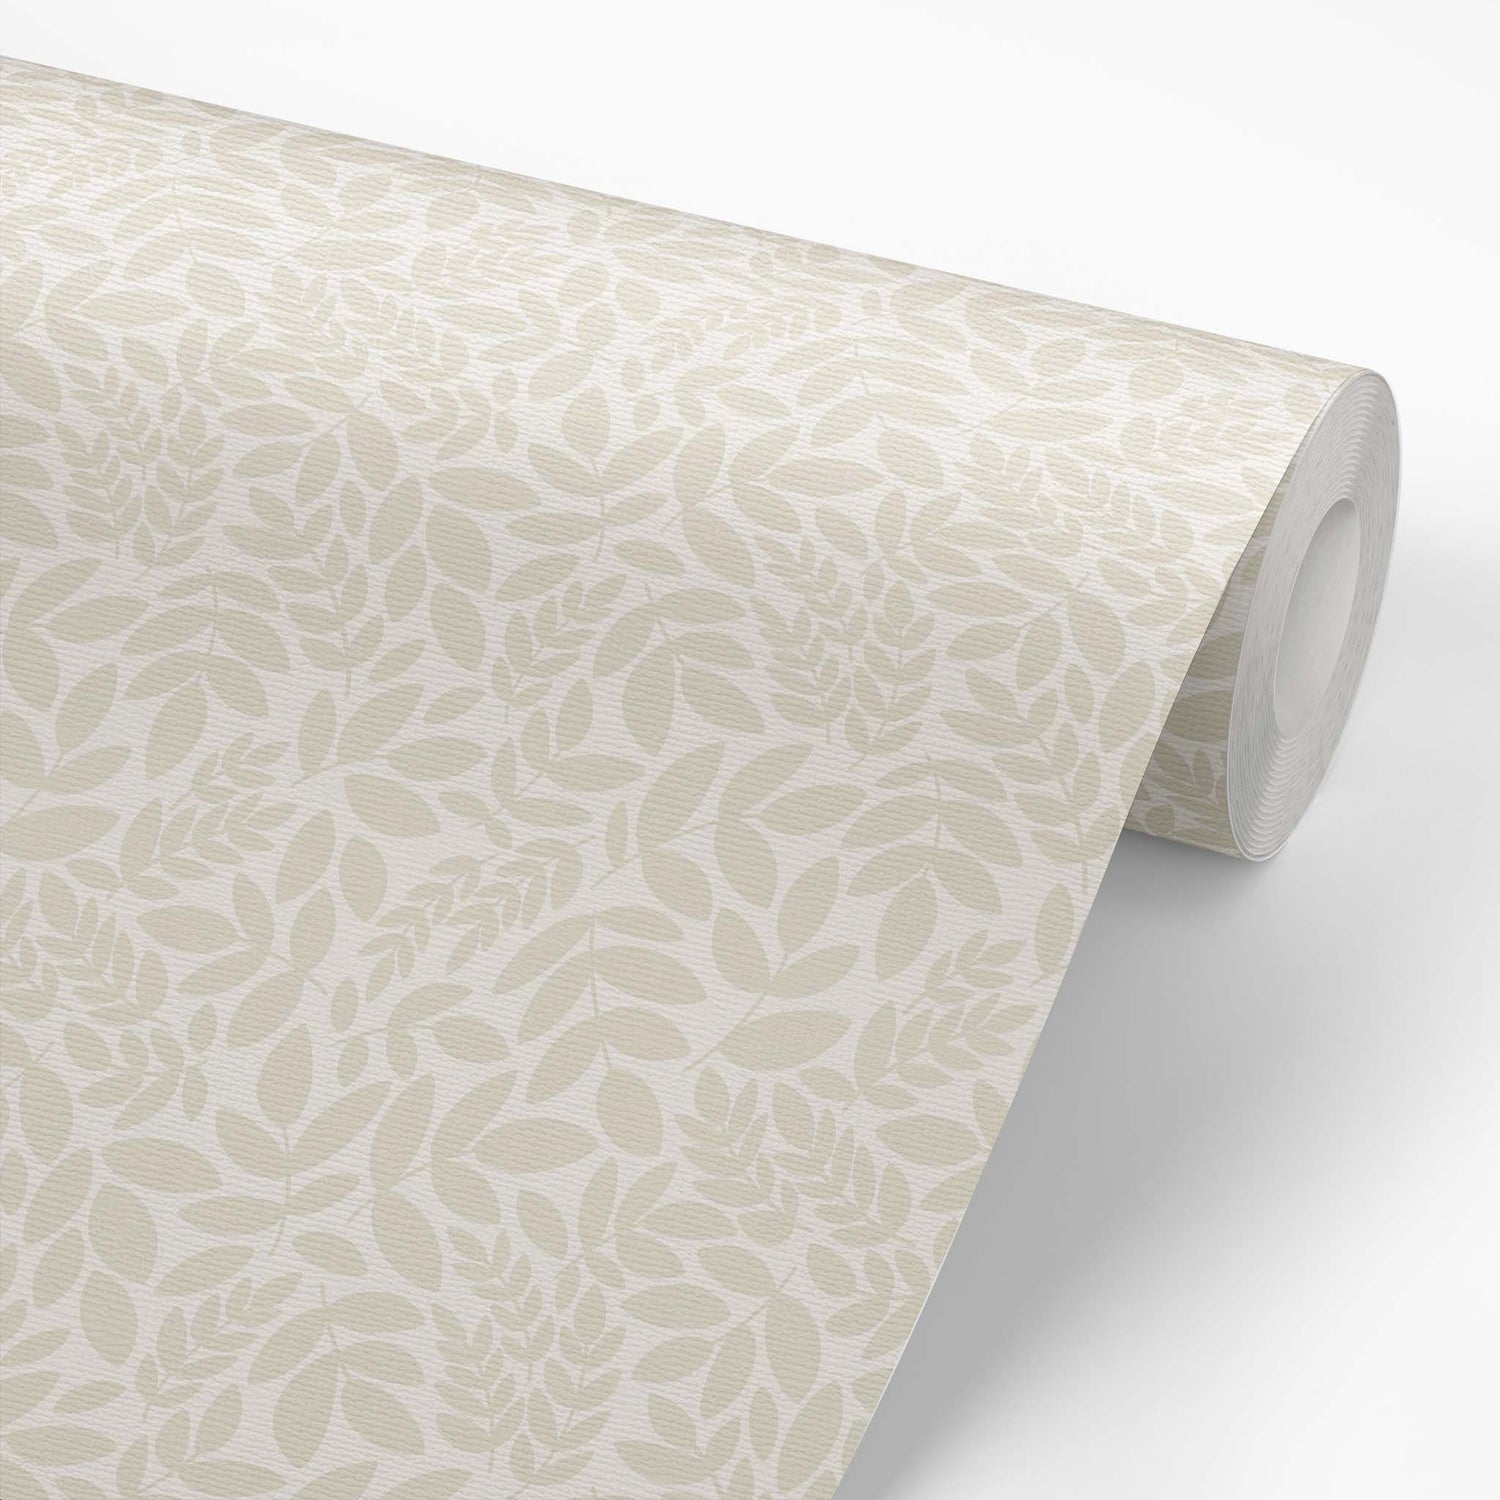 Adorn your walls with our luxurious Falling Leaves Wallpaper in Sand. The scattered flowers add a subtle touch of elegance, while the sand hue brings a calming and sophisticated atmosphere to any room shown on a wallpaper roll.